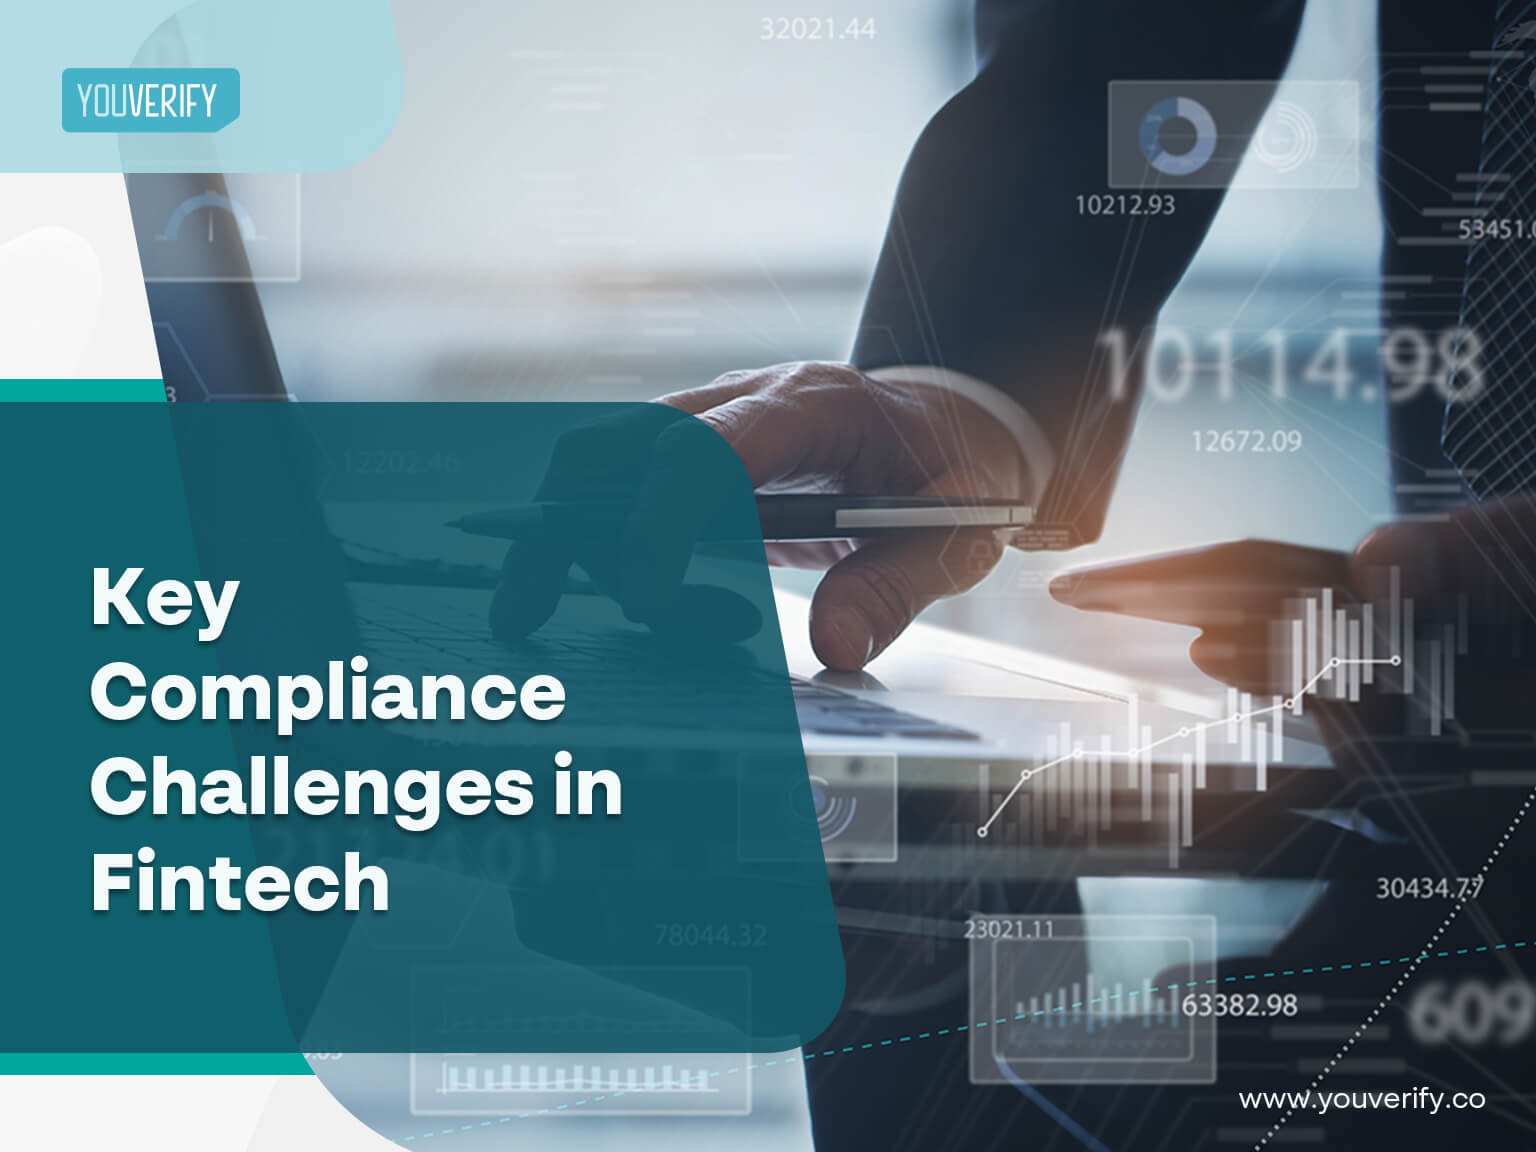 Key Compliance Challenges in Fintechs